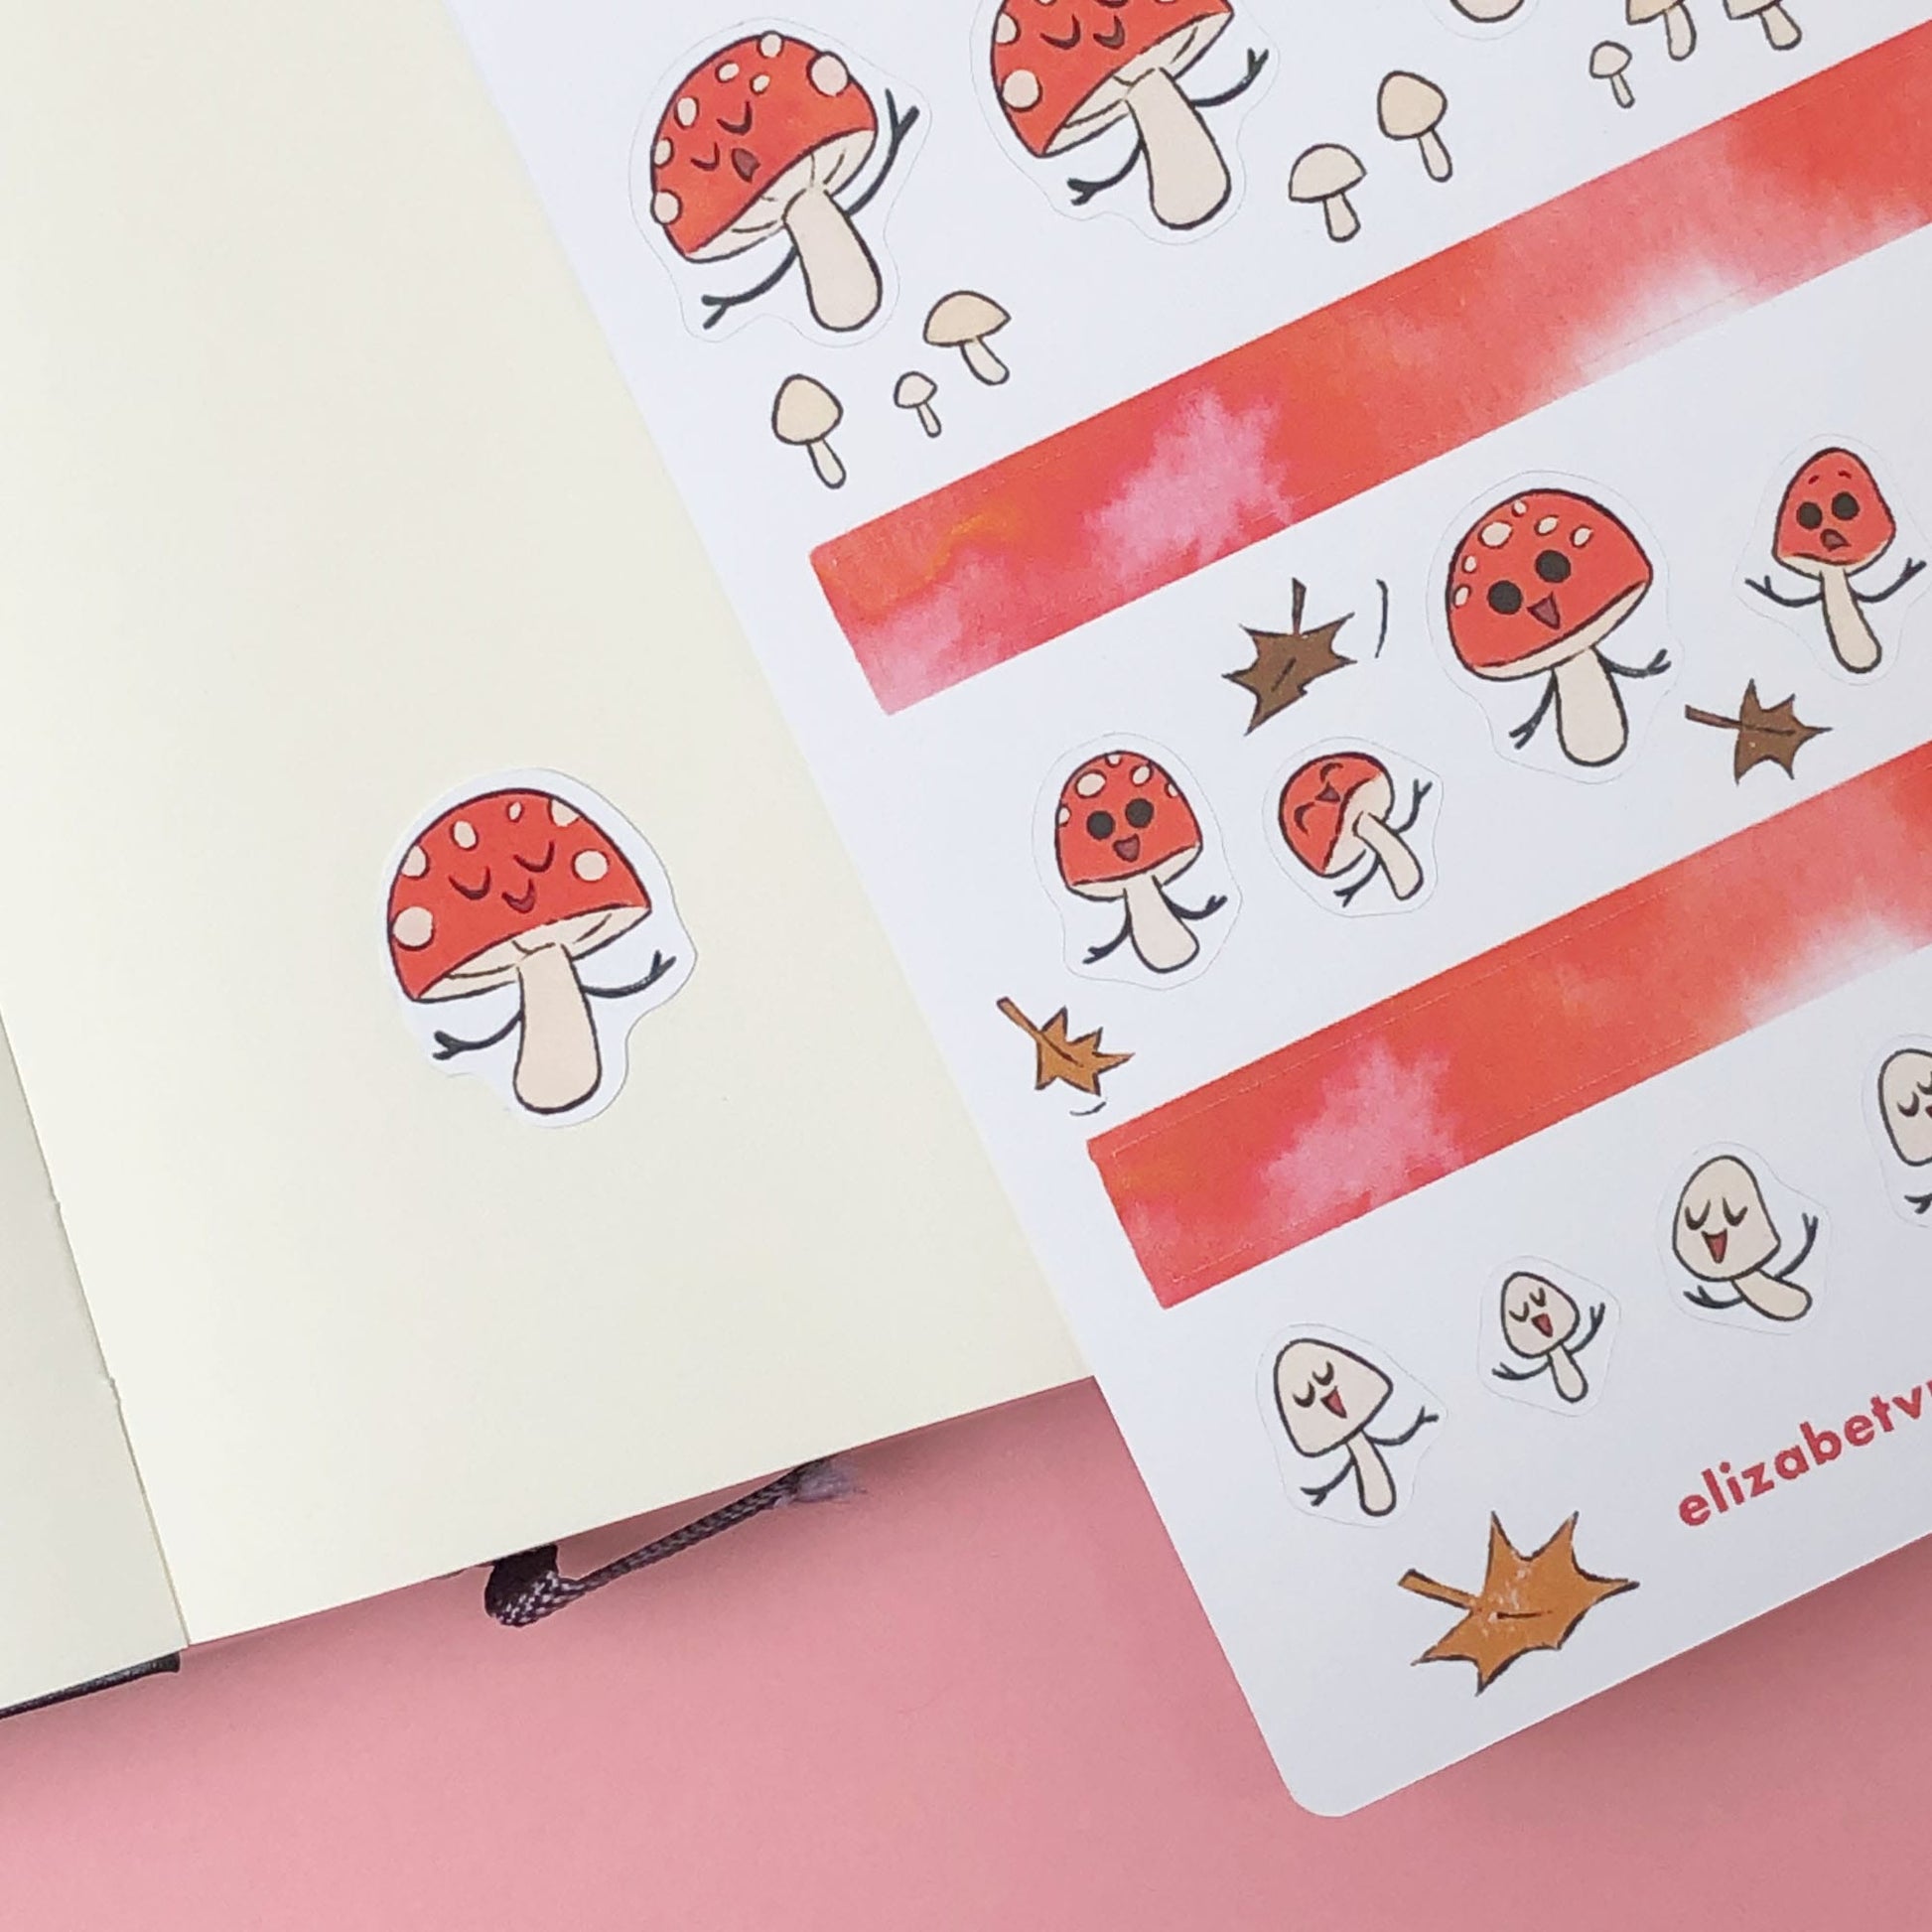 Mushroom art stickers on a journal page.